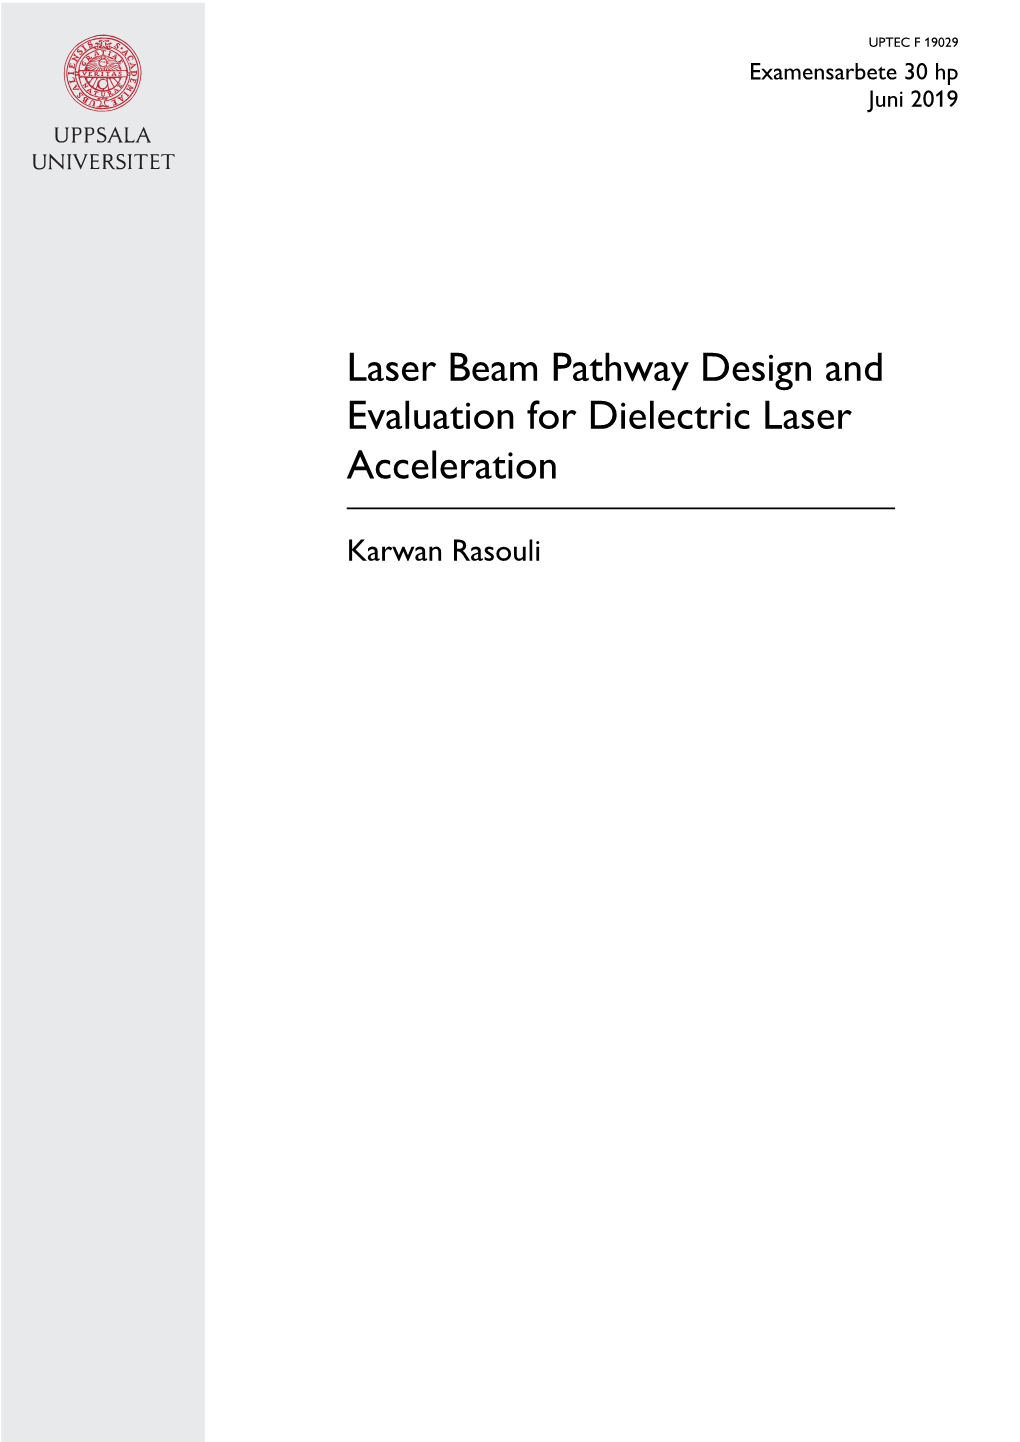 Laser Beam Pathway Design and Evaluation for Dielectric Laser Acceleration